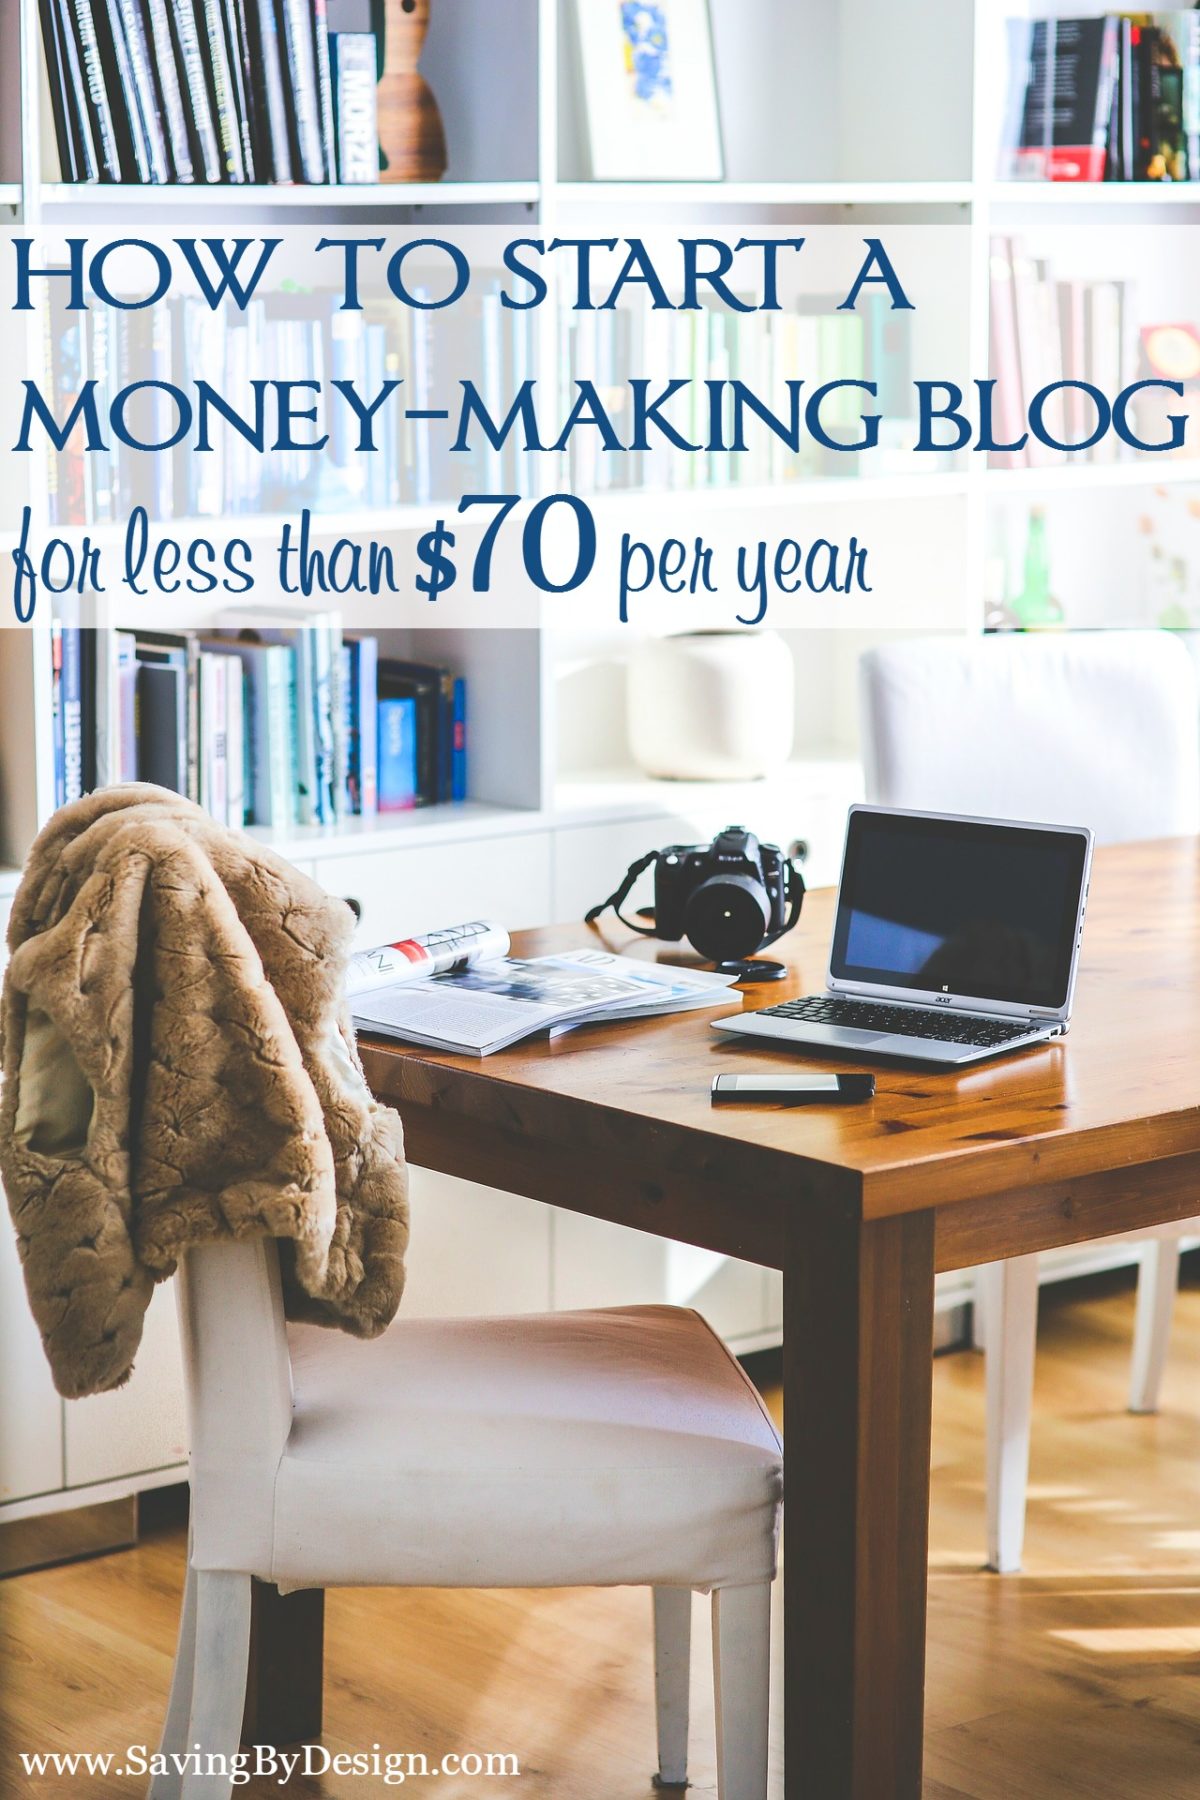 Starting a blog has made my dream of being a work-at-home mom come true. Here's how to start a blog to make money for less than $70 per year so you can achieve your dreams too!